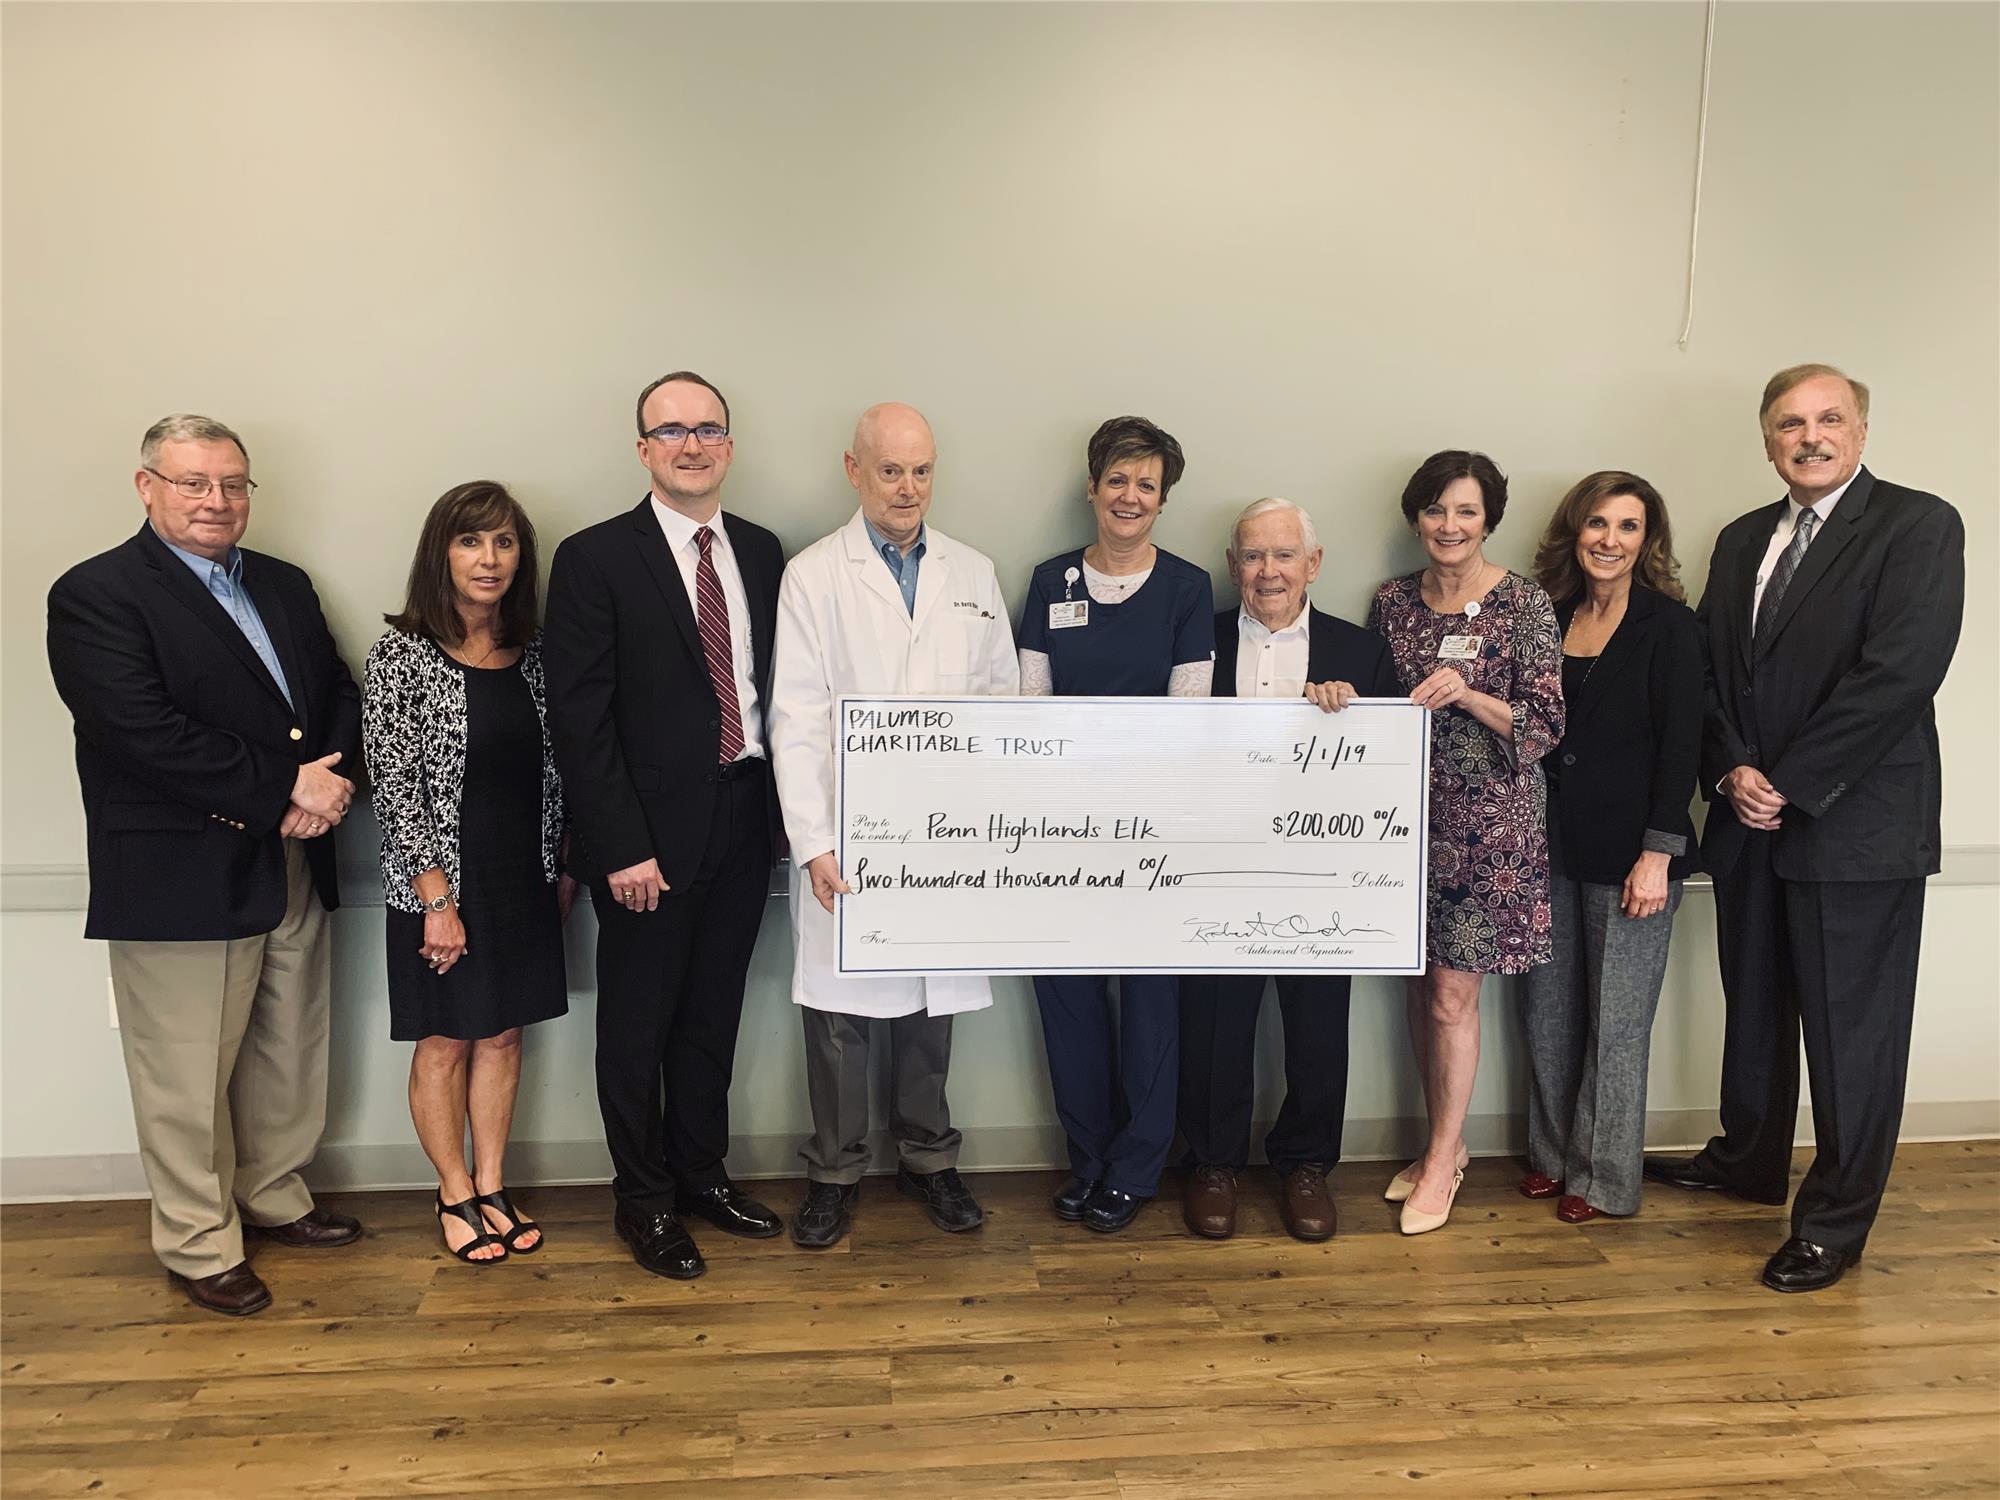 Penn Highlands Elk recently was awarded $200,000 from the A.J. and Sigismunda Palumbo Charitable Trust